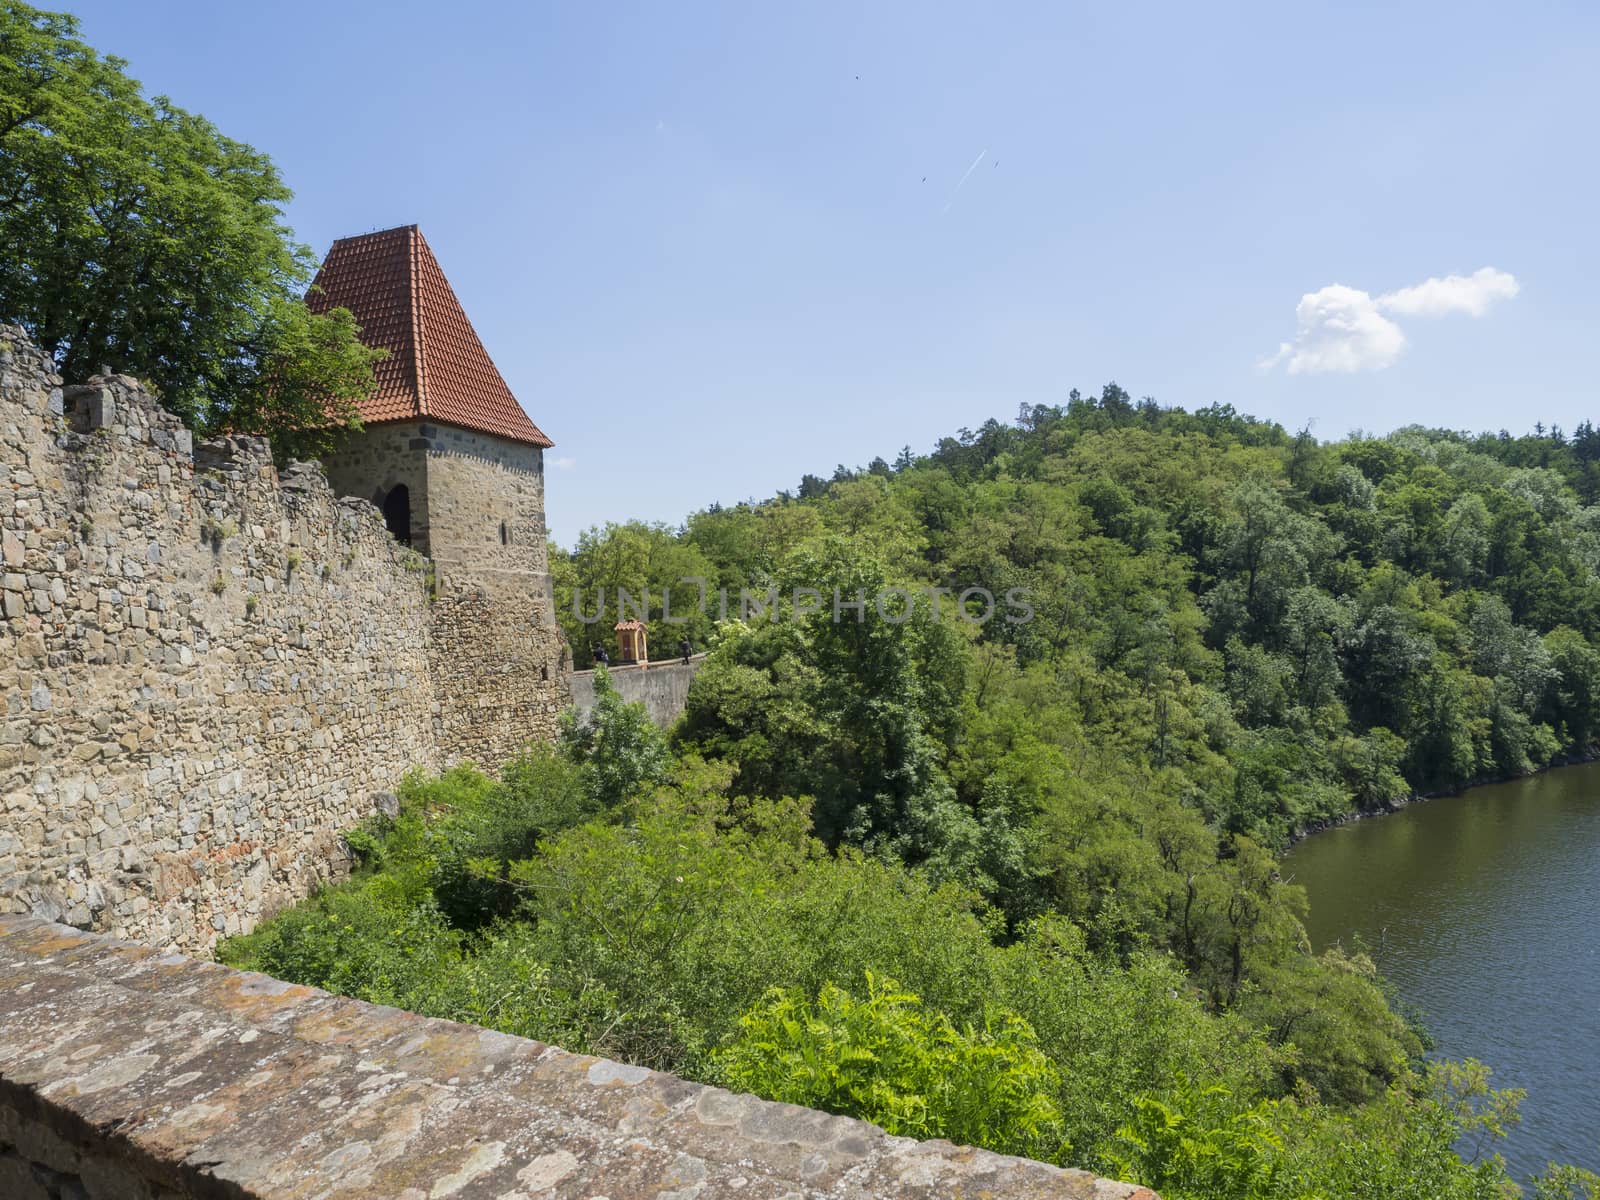 view from rampart of medieval castle Zvikov (Klingenberg), wall with tower, vltava river, spring green trees and blue sky, Czech Republic